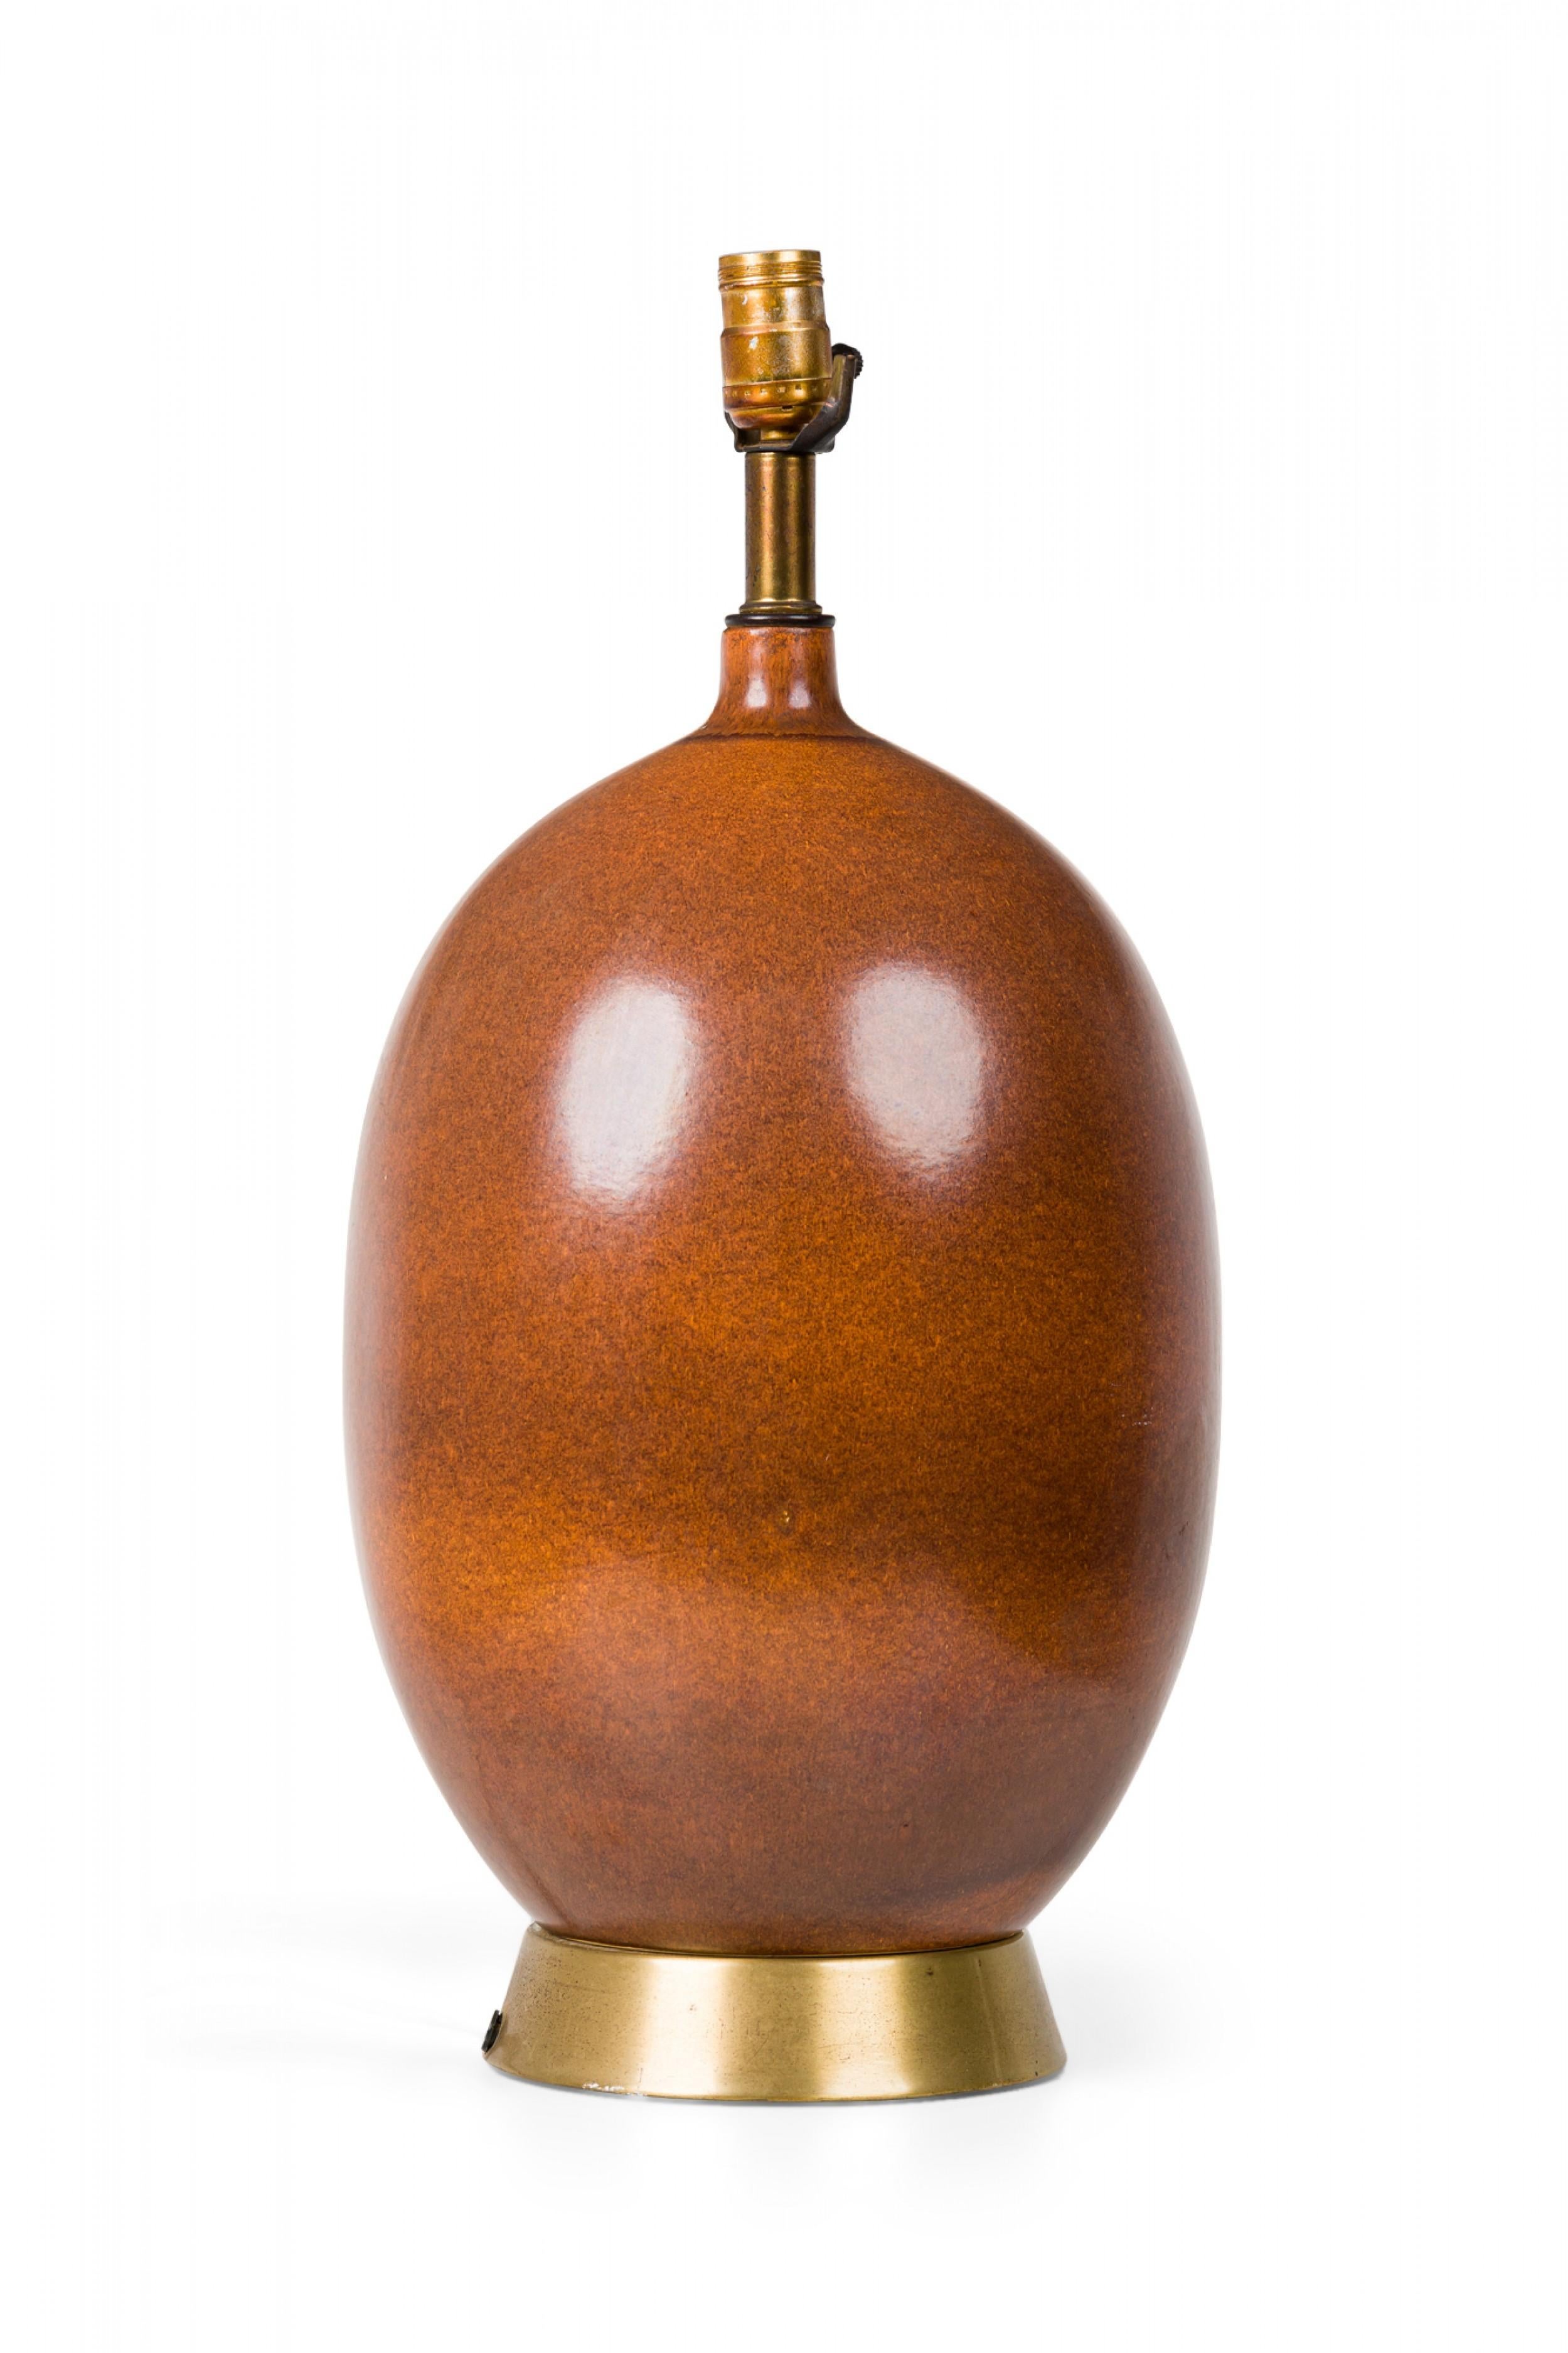 Mid-Century American ceramic table lamp in egg-like ovoid form with a pinched tapered neck extending to a fitted brass stem and functioning light switch socket, finished in a semi-gloss textured brown glaze with stippled gradations, mounted on a